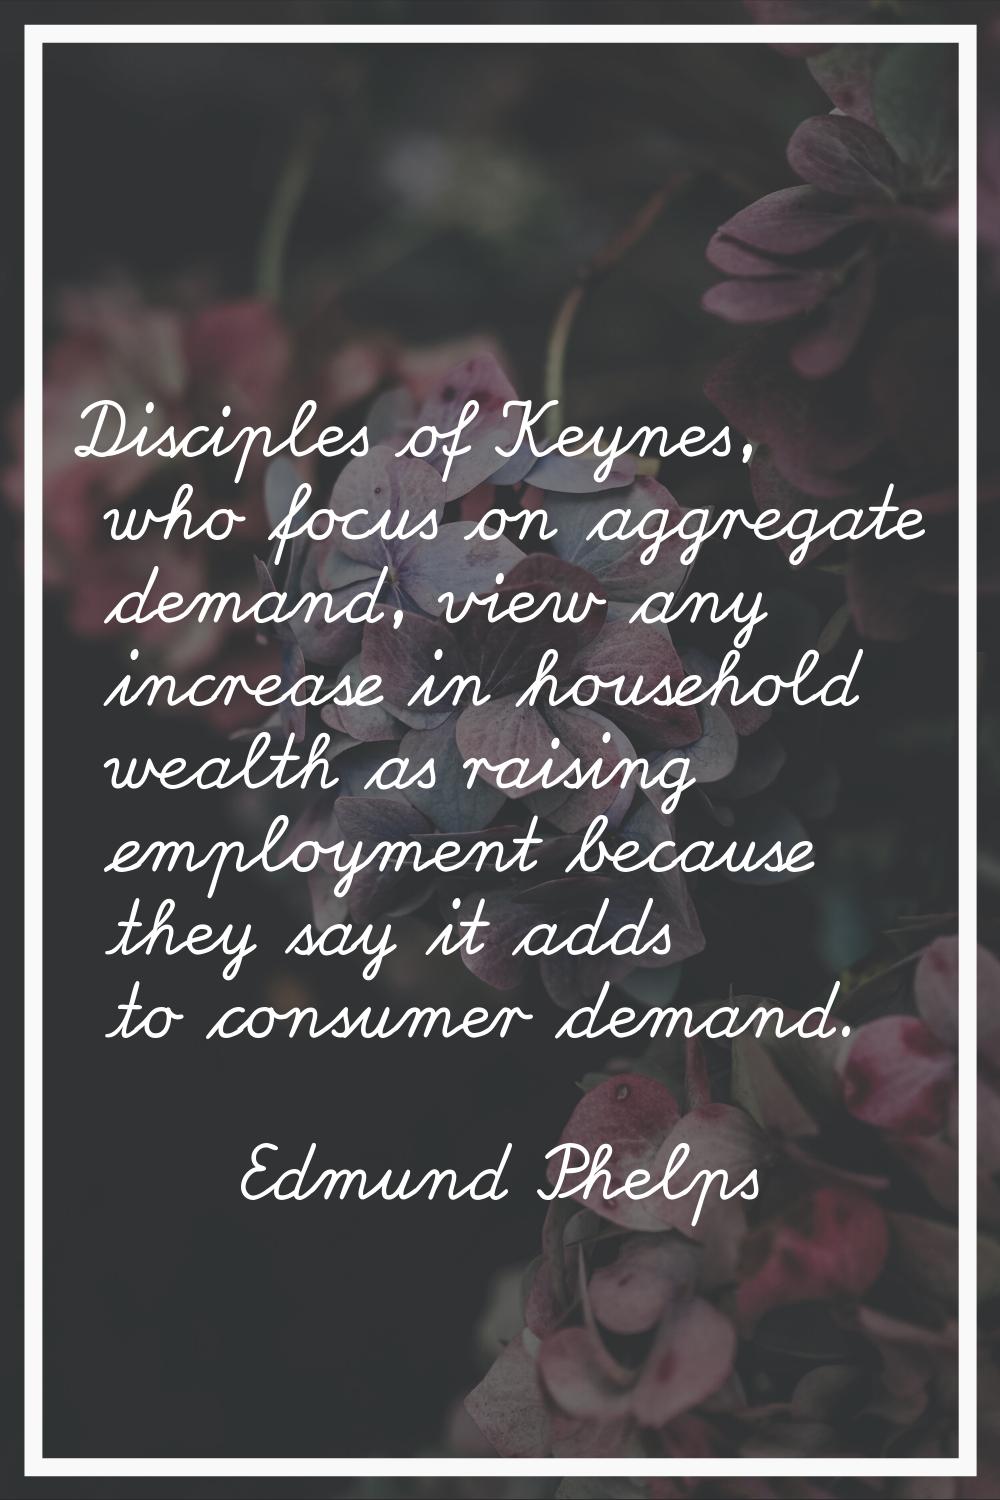 Disciples of Keynes, who focus on aggregate demand, view any increase in household wealth as raisin